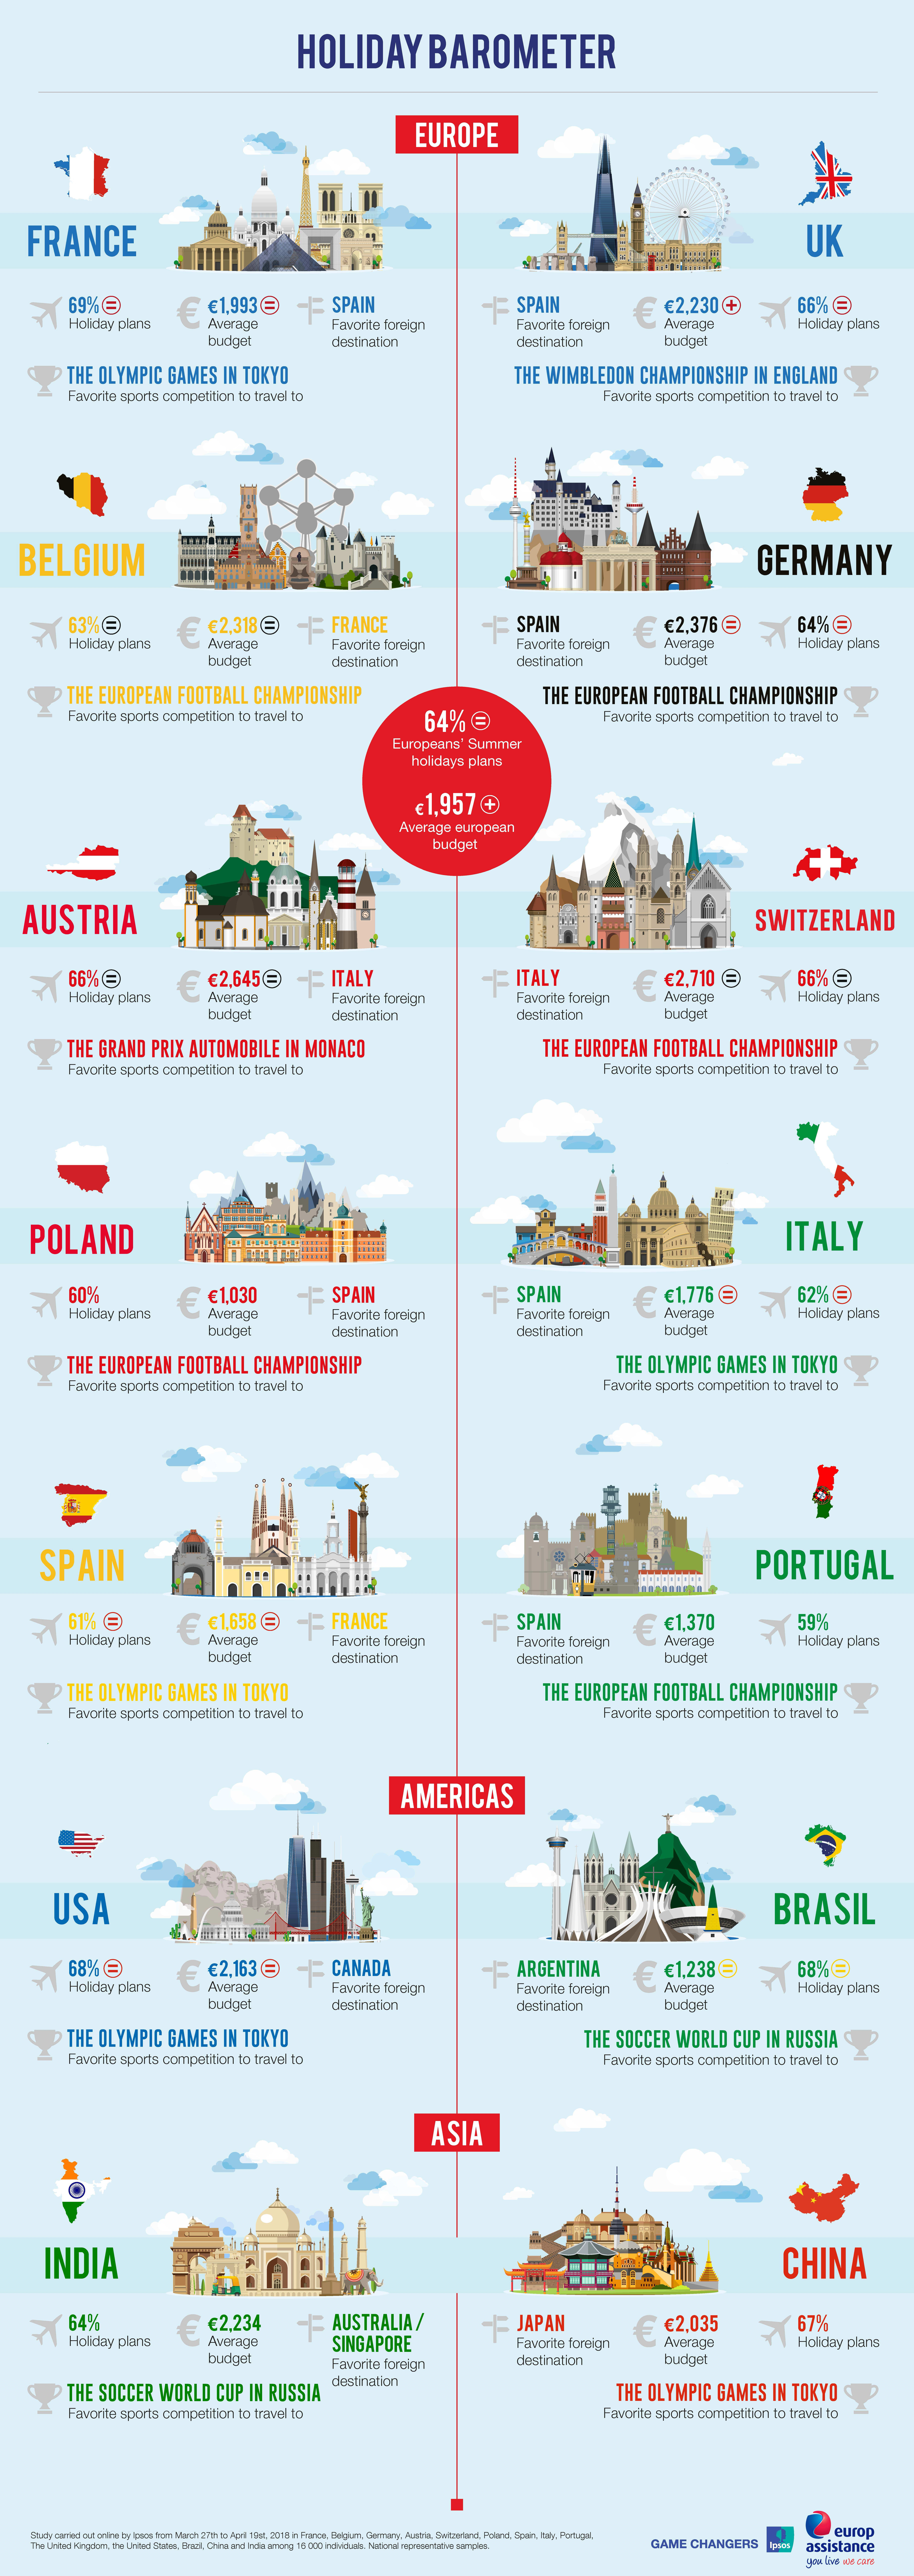 Summer holiday plans among Europeans, Americans and Asians - Infographic